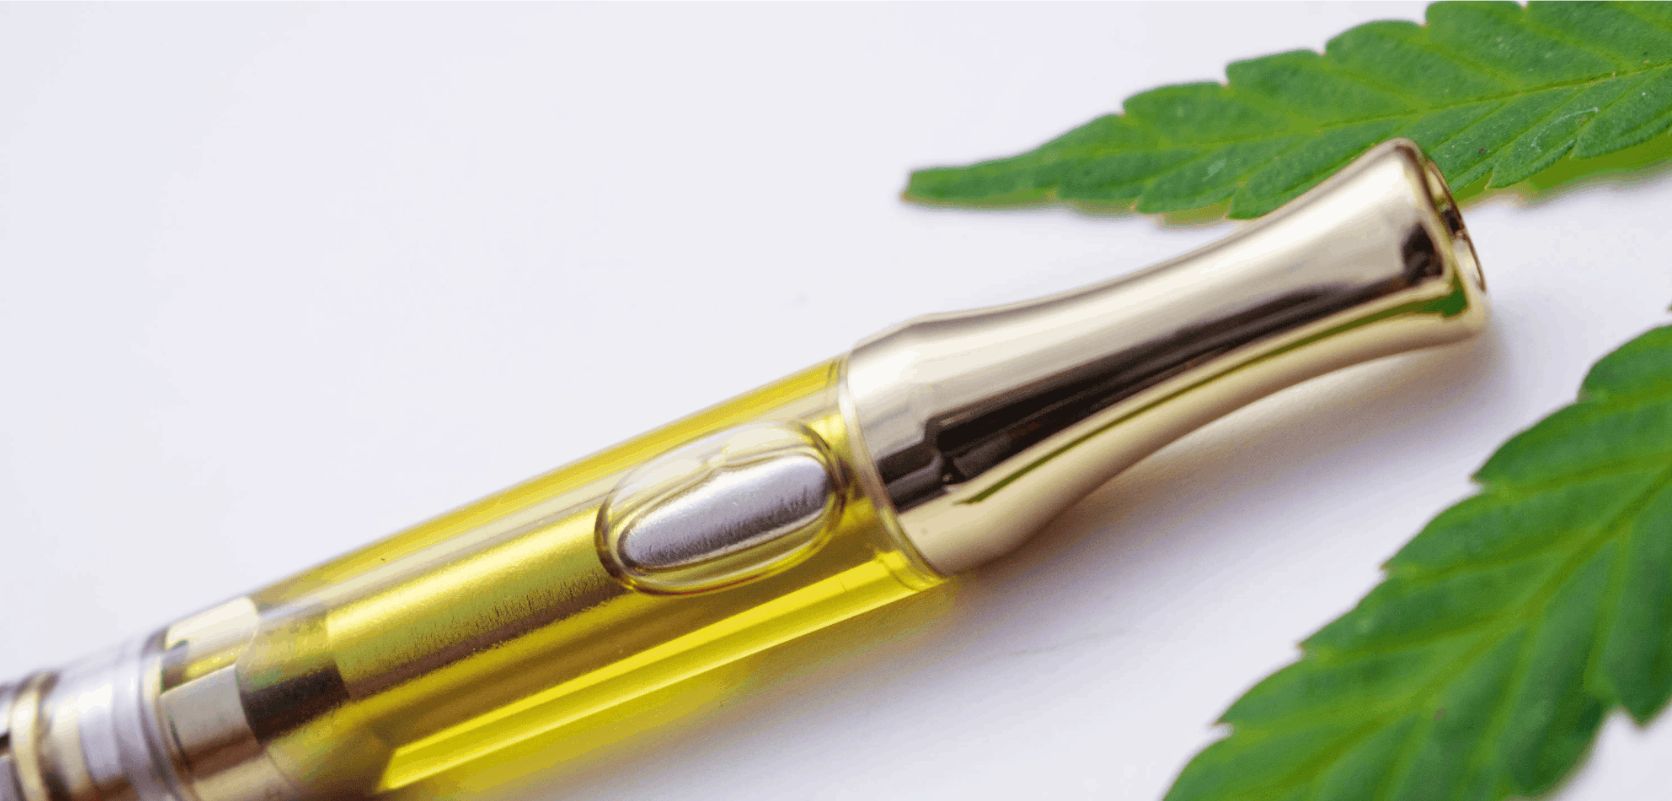 A weed pen, sometimes referred to as a vape pen or vaporizer pen, is a stylish, portable gadget made to provide the benefits of cannabis in an innovative manner. 